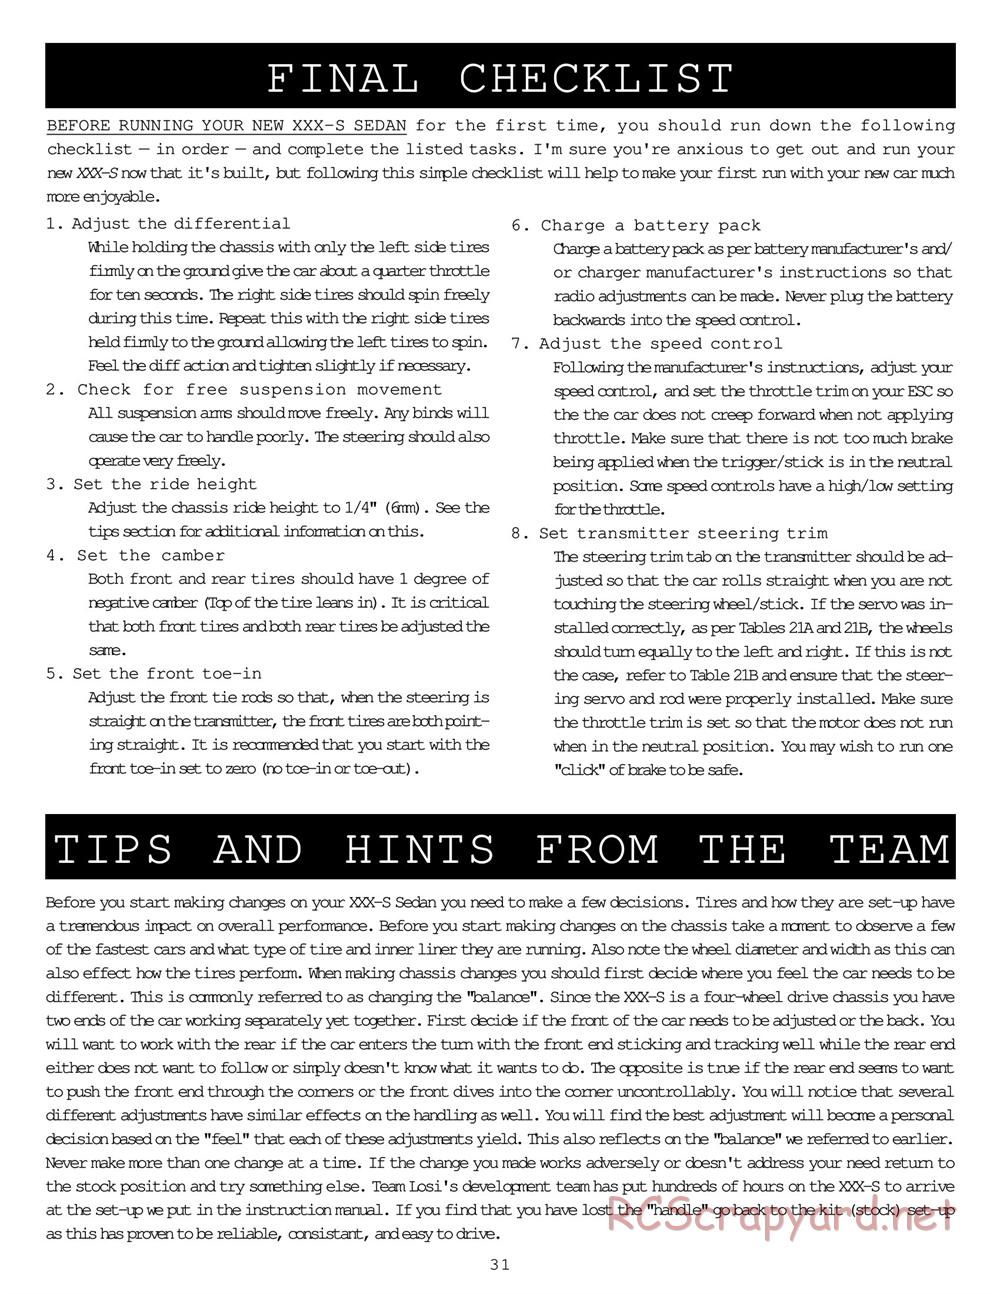 Team Losi - XXX-S - Manual - Page 34